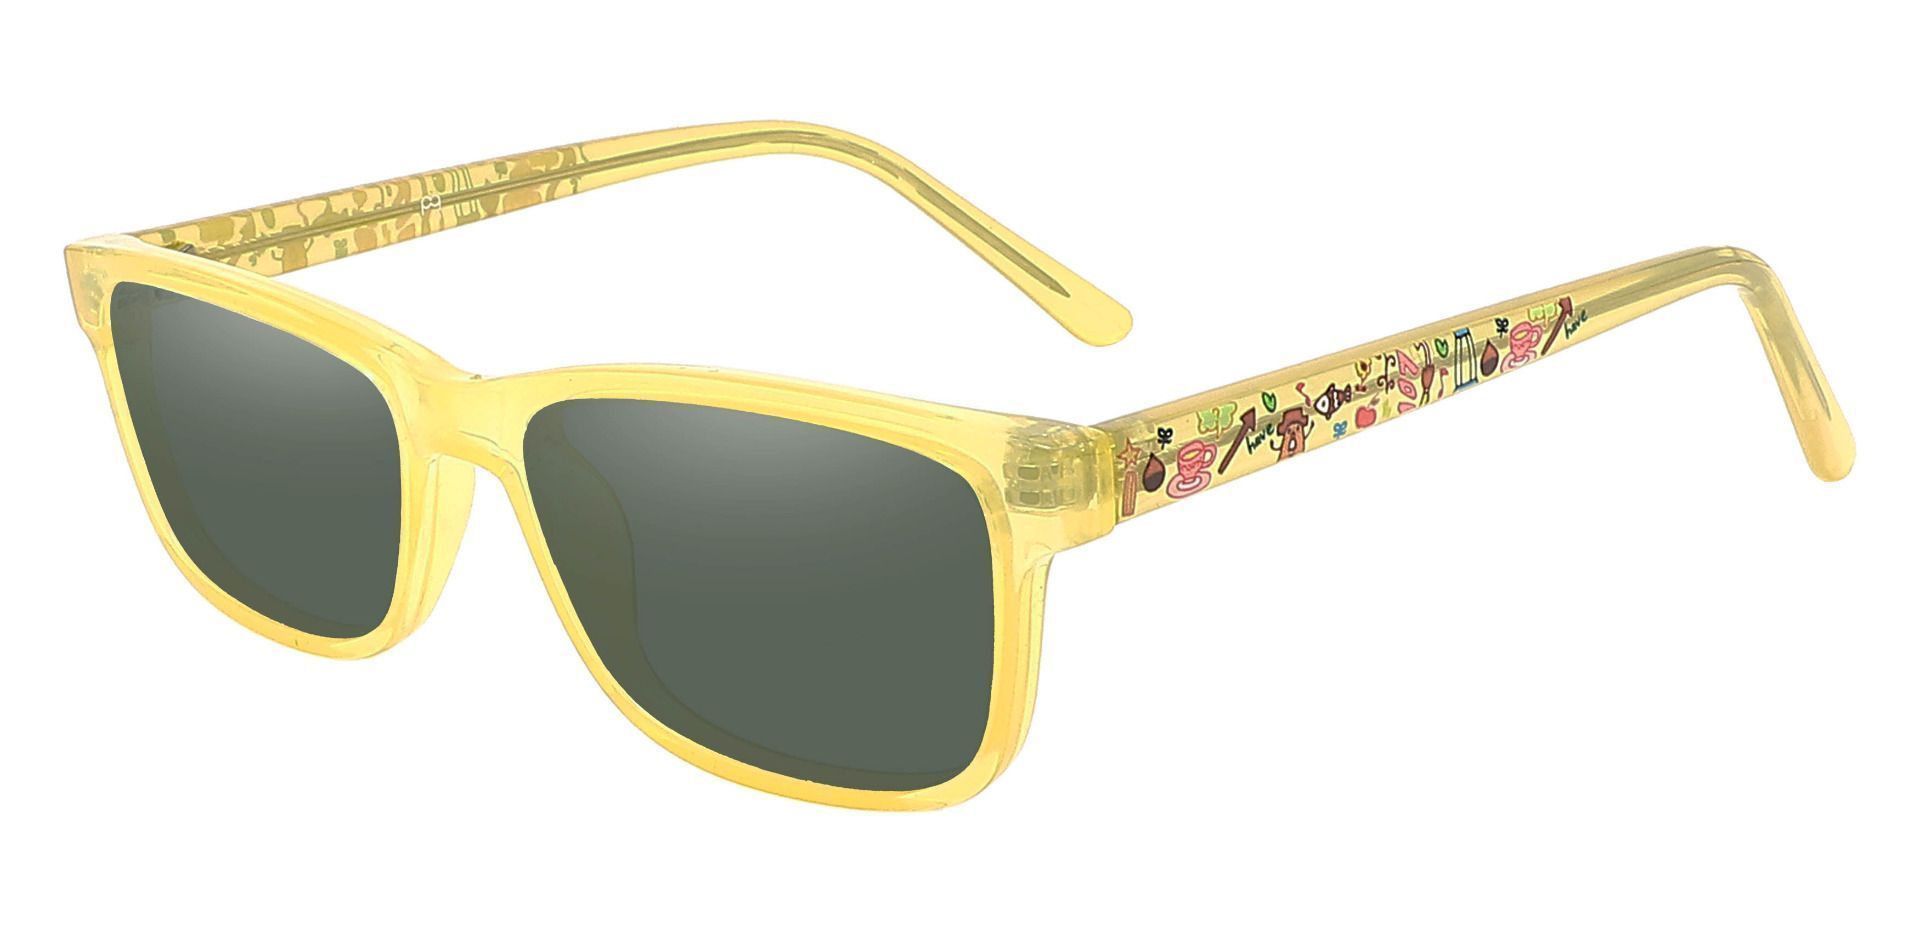 Cory Rectangle Non-Rx Sunglasses - Yellow Frame With Green Lenses